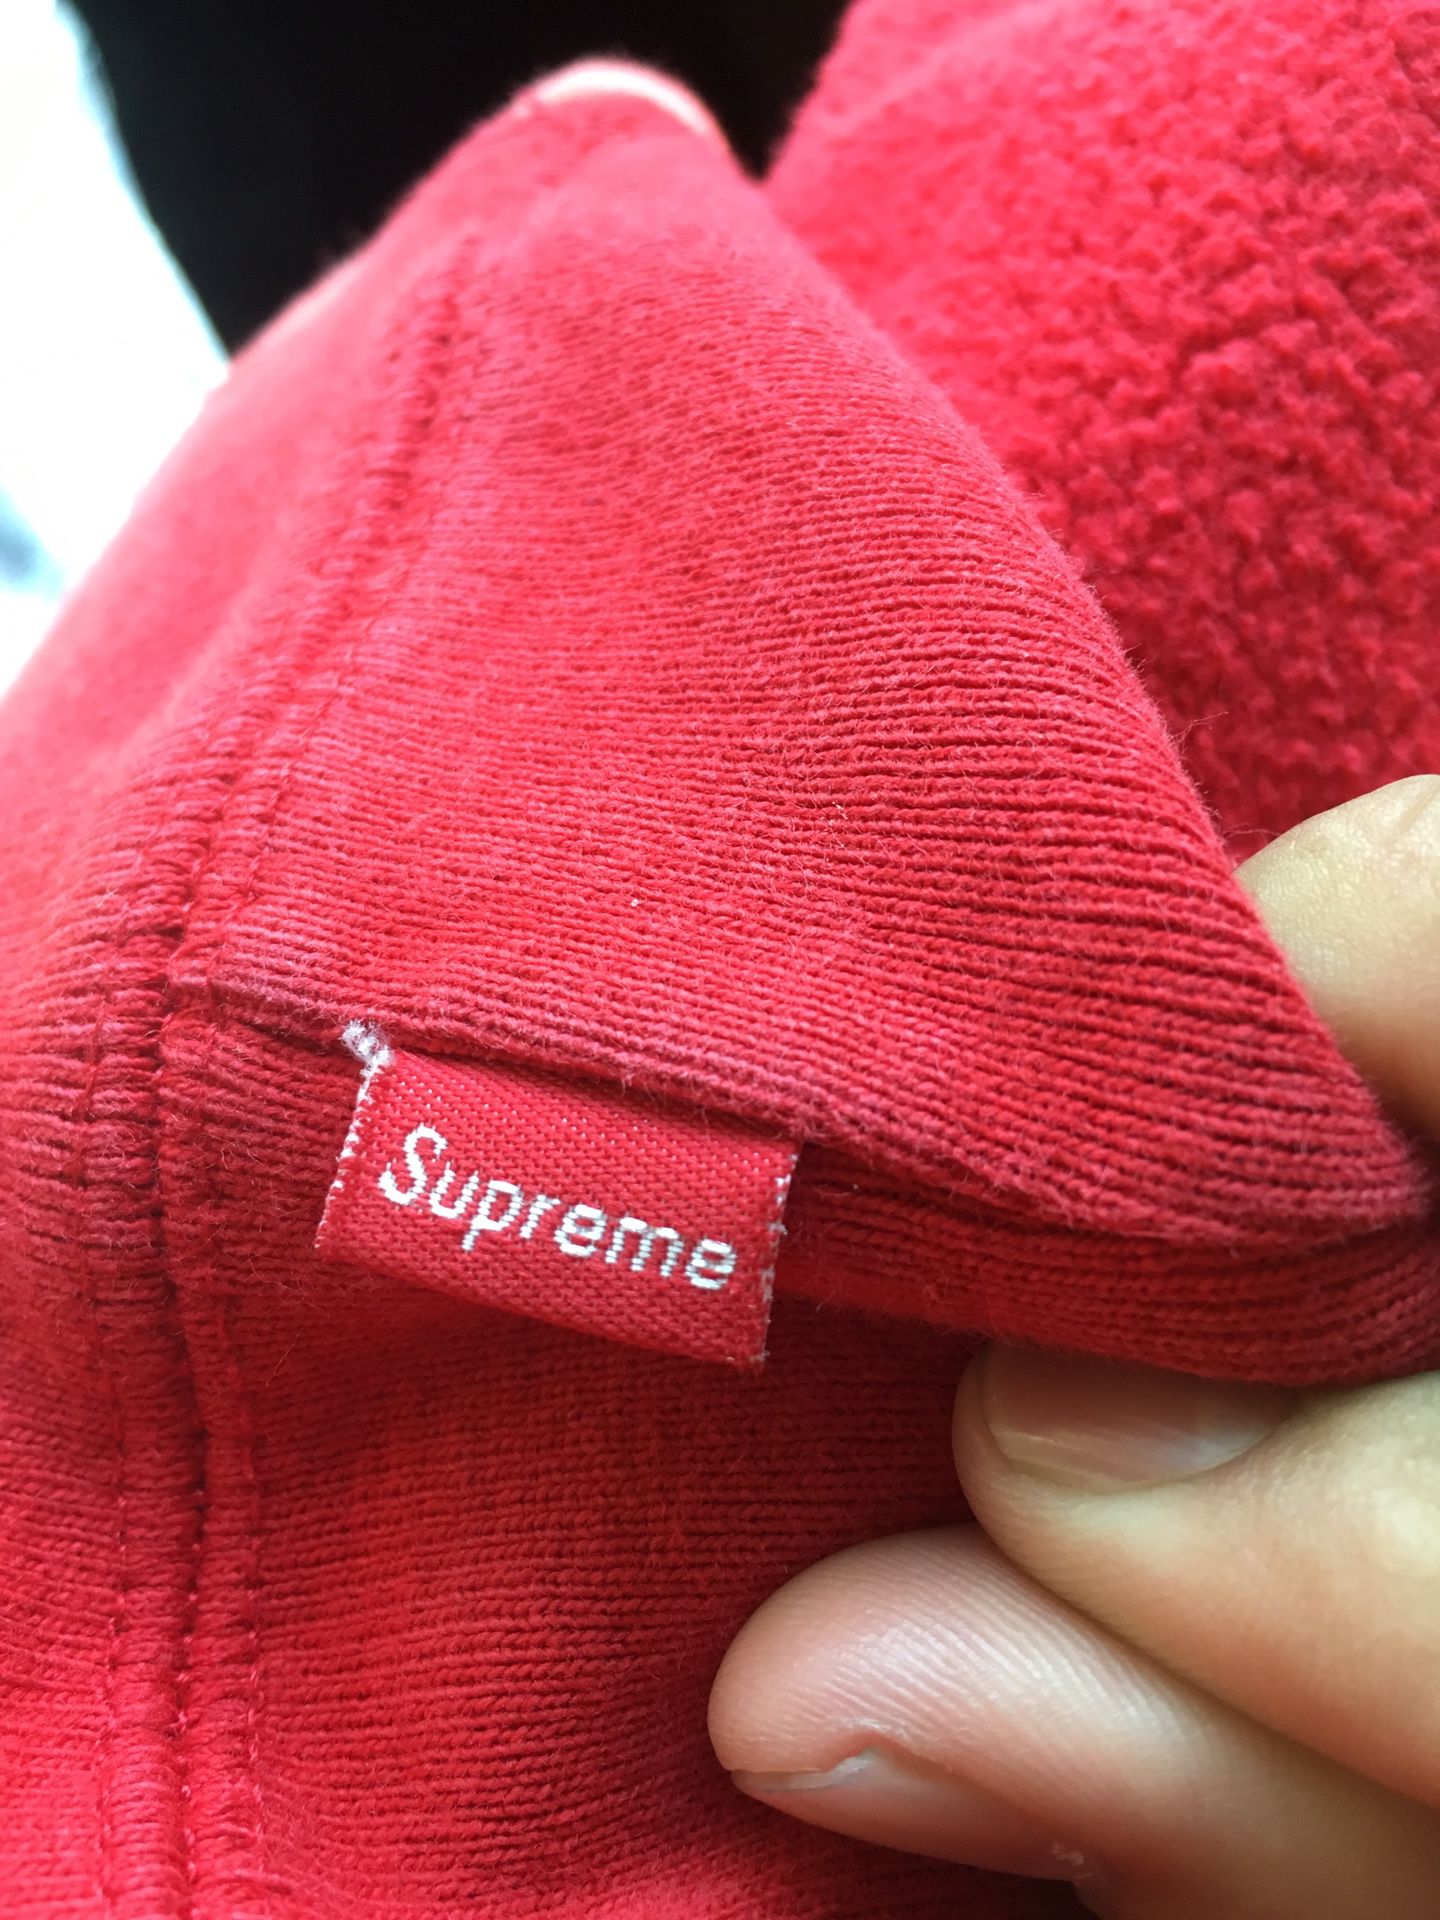 real Supreme x Louis Vuitton Box Logo Hooded Sweatshirt size small for Sale  in Douglas, GA - OfferUp